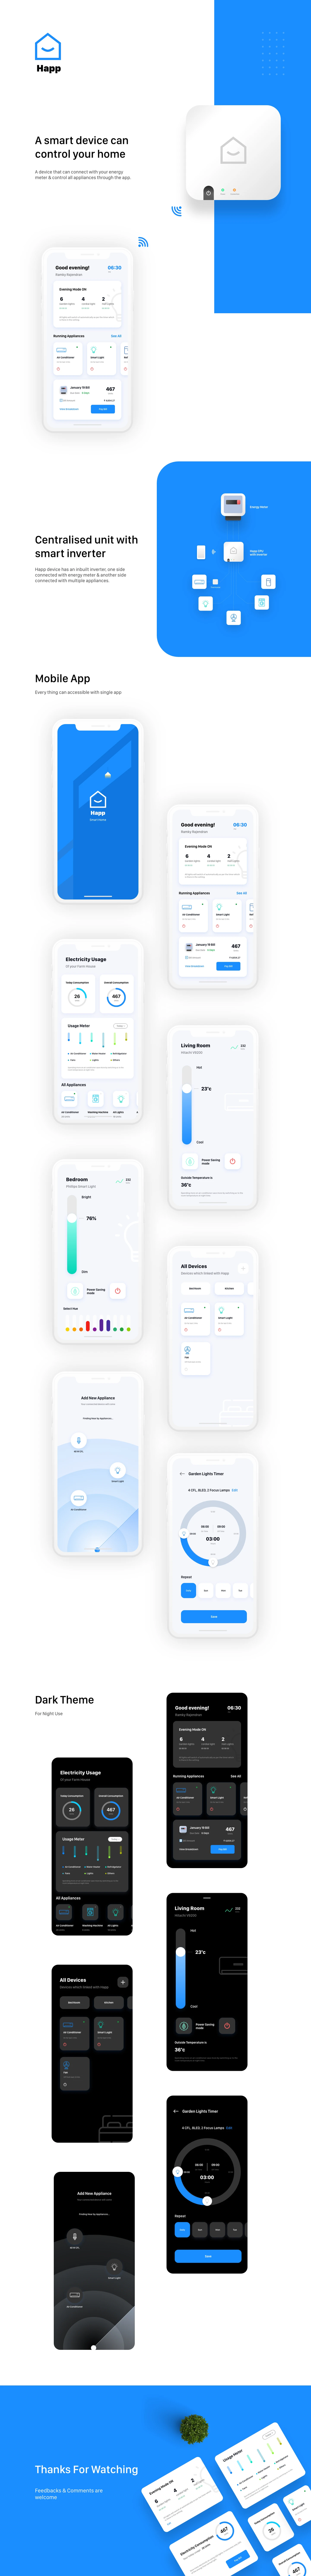 Happ - Smart Home App UI Kit for Adobe XD - Free UI Kit includes dashboard, usage graph, device control, add device, timer, etc